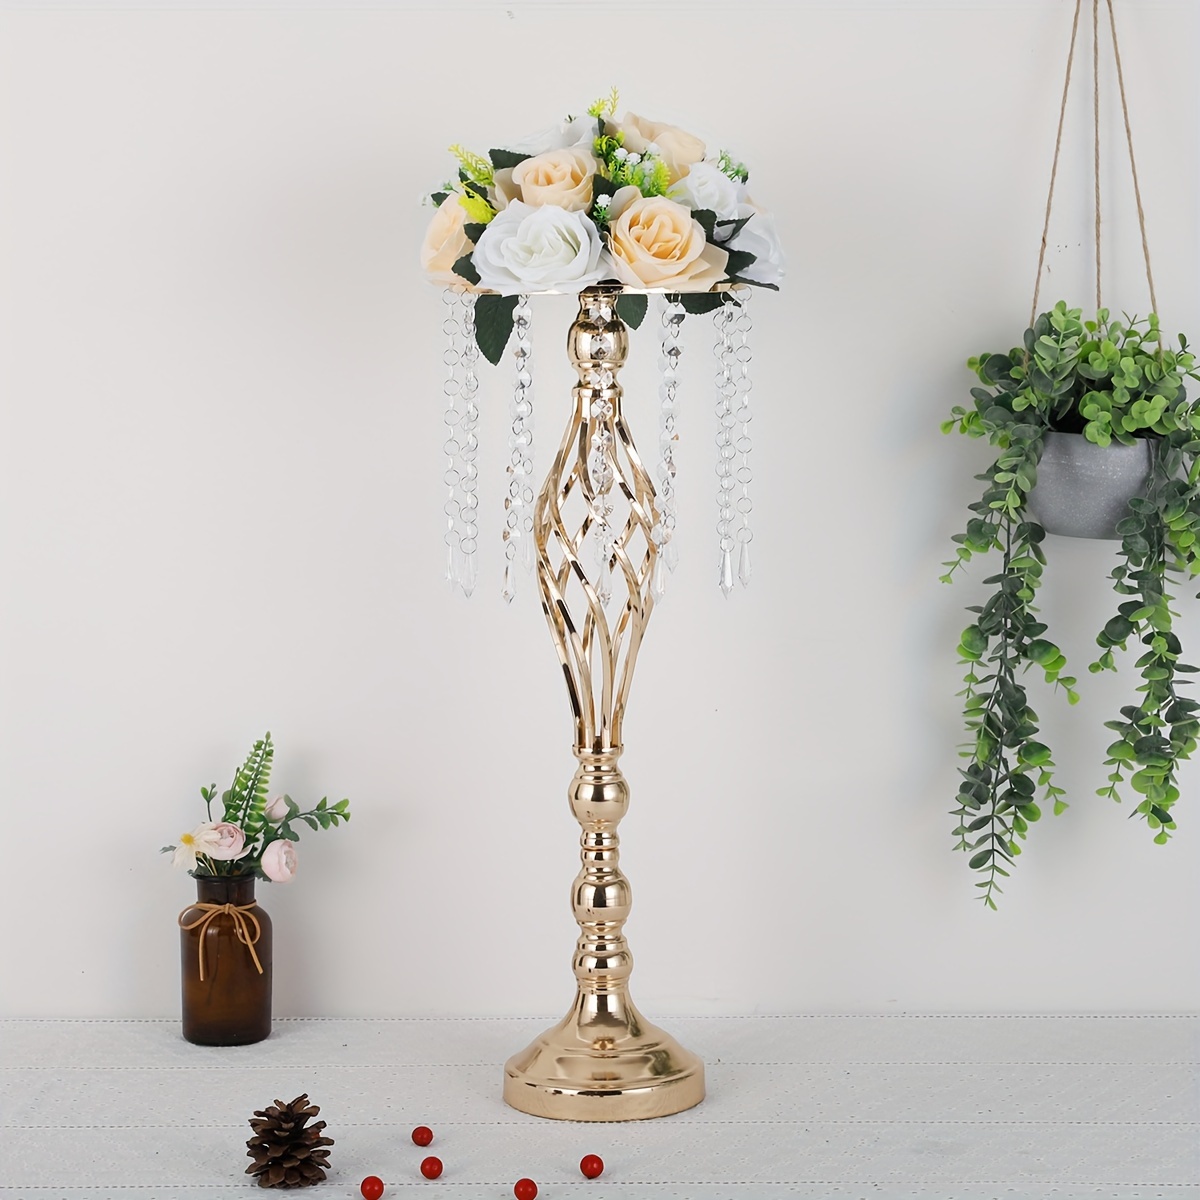 

1pc, Wedding Table Centerpiece - Centerpiece Gold Vase, 1 Piece Tall Metal Vase With 12 String Crystal Chandelier, Flower Stand For Wedding Reception Birthday Party Event Home Decor